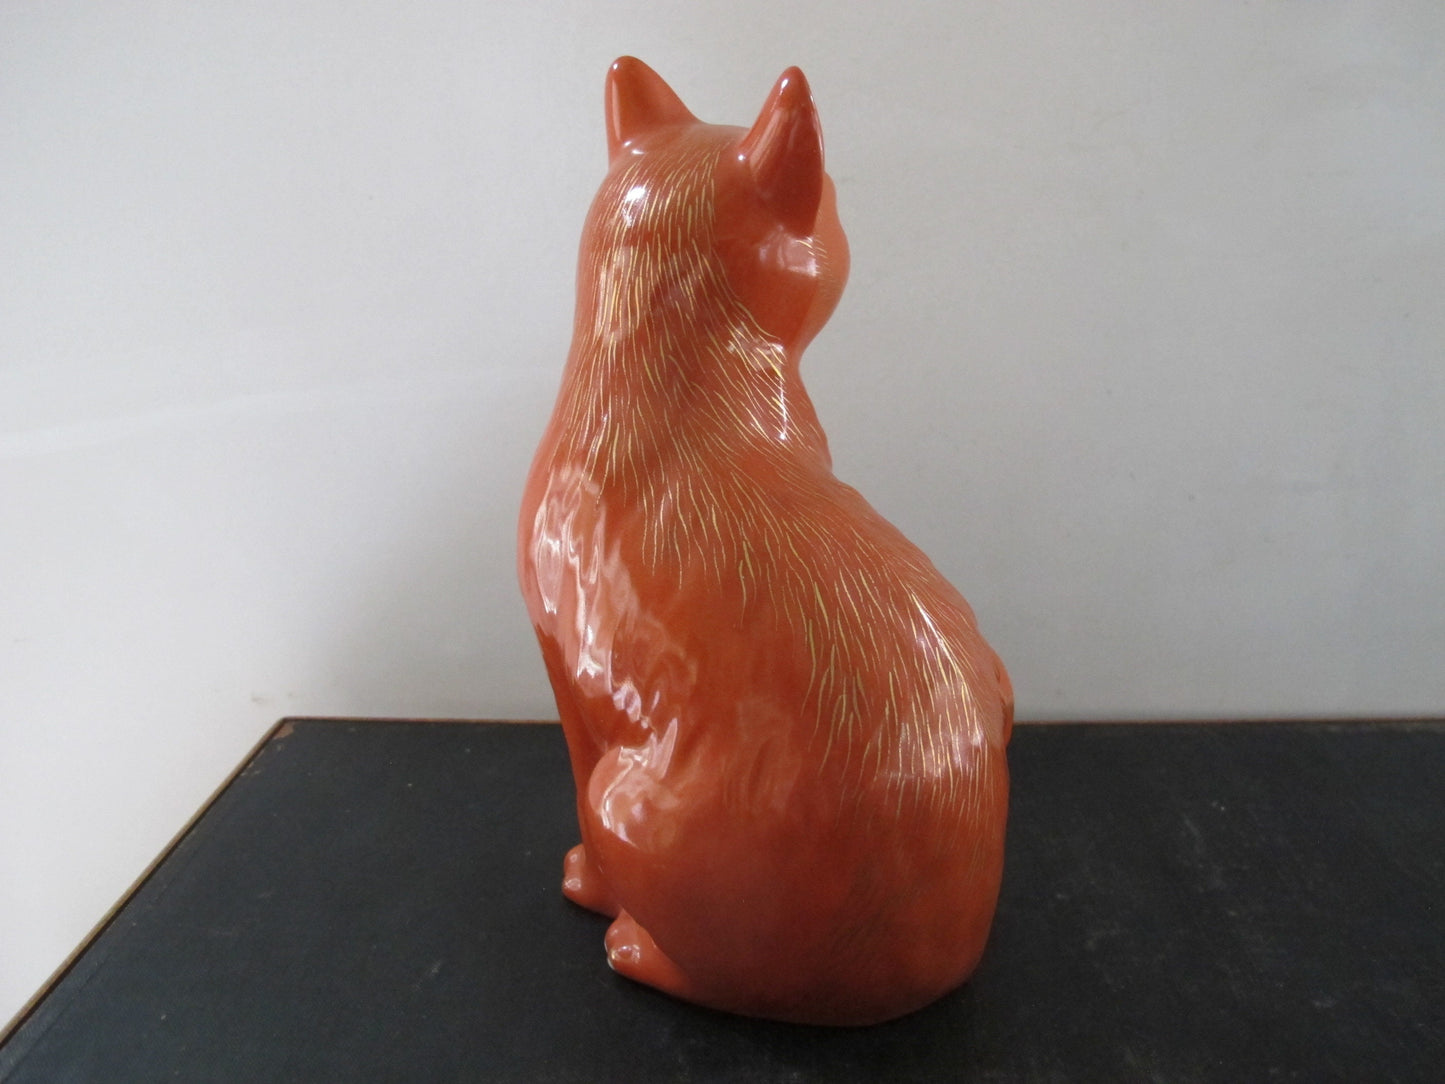 Galle Style Cat in Scarlet Red and Gold Reproduction of 1880s Original Emile Galle Tribute Likely German